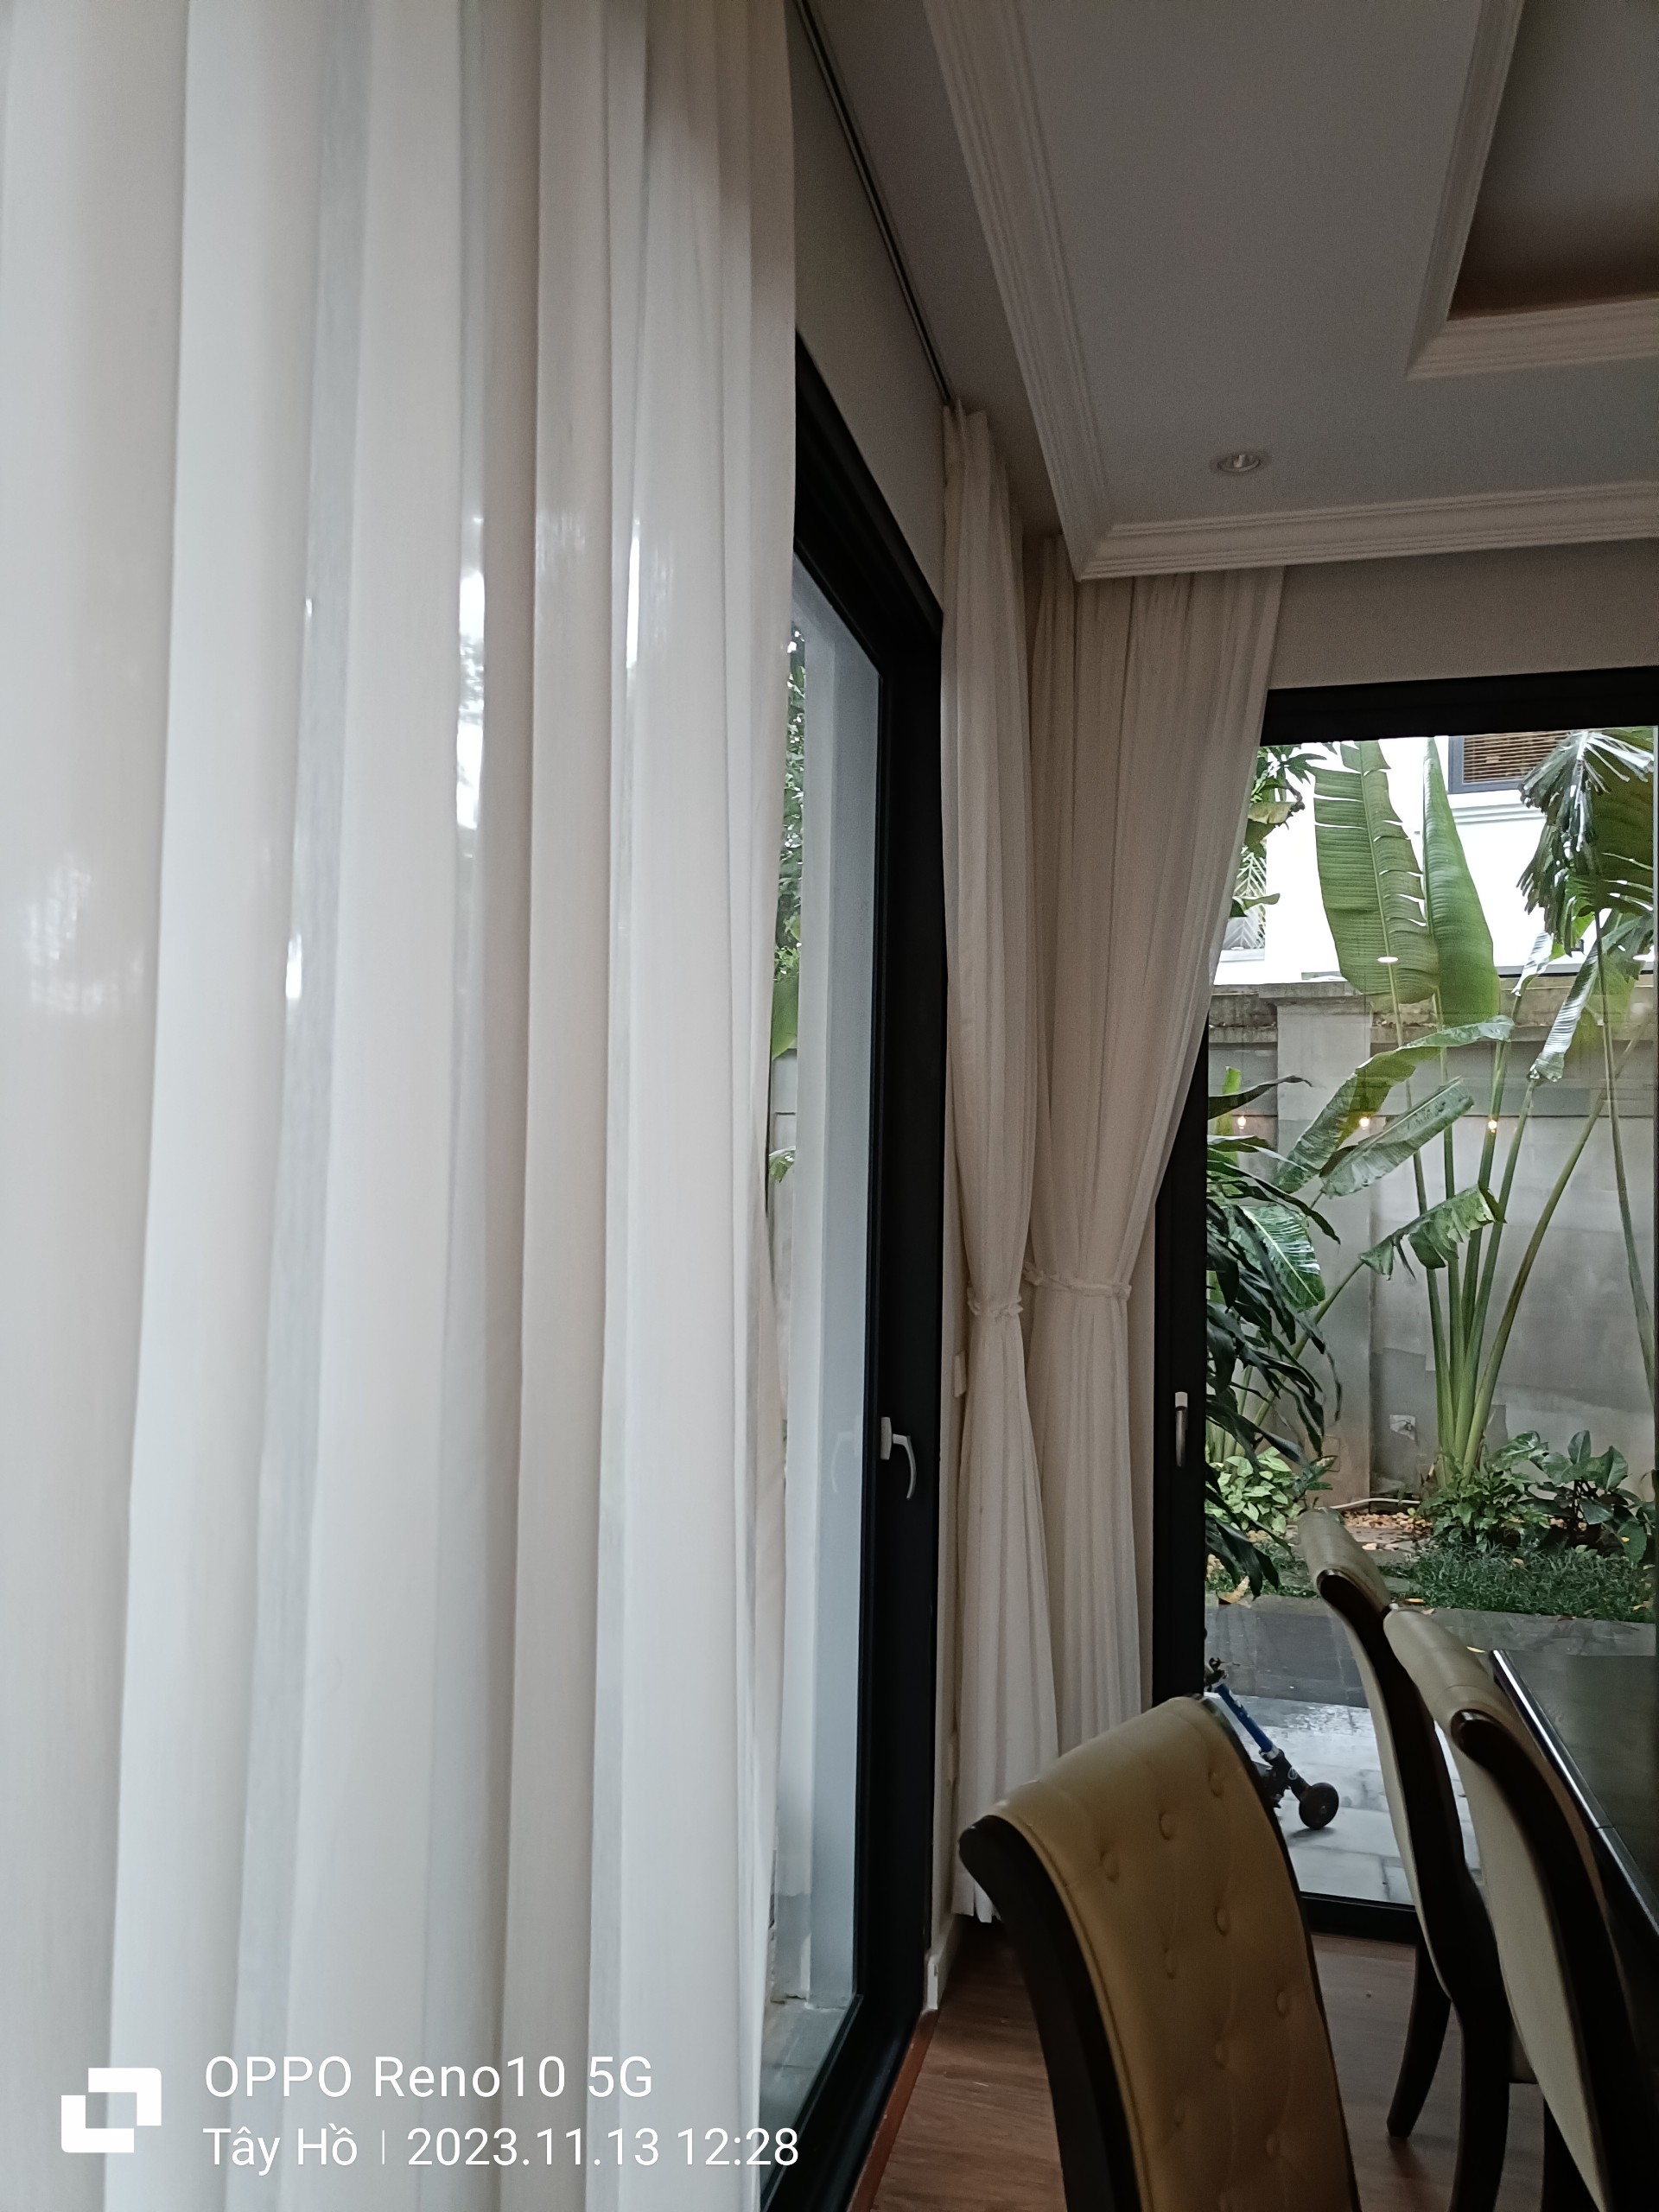 Customized curtain making and installation